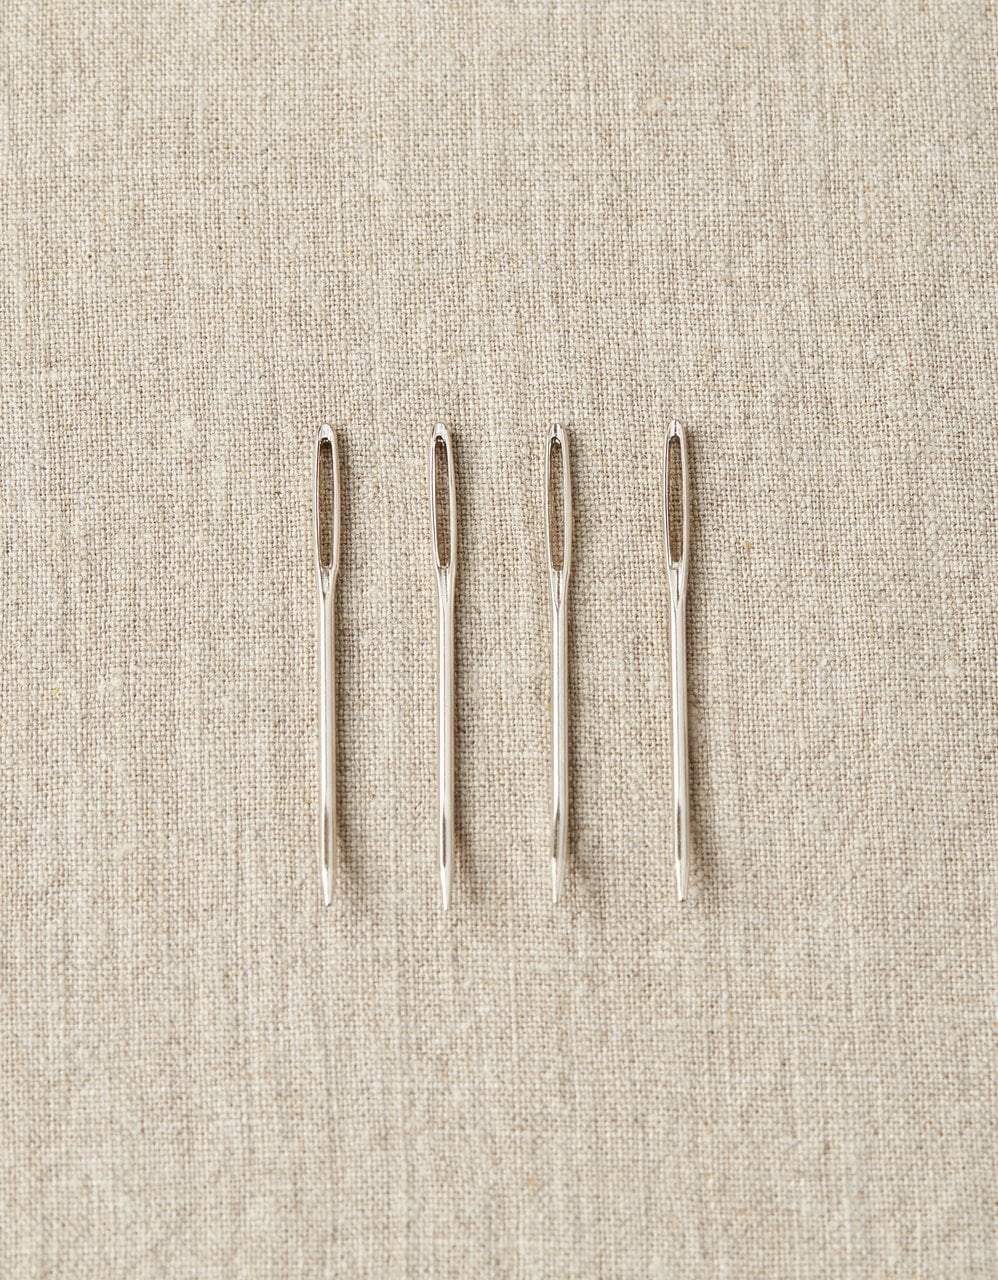 Bent Tip Tapestry Needles - Cocoknits Cocoknits